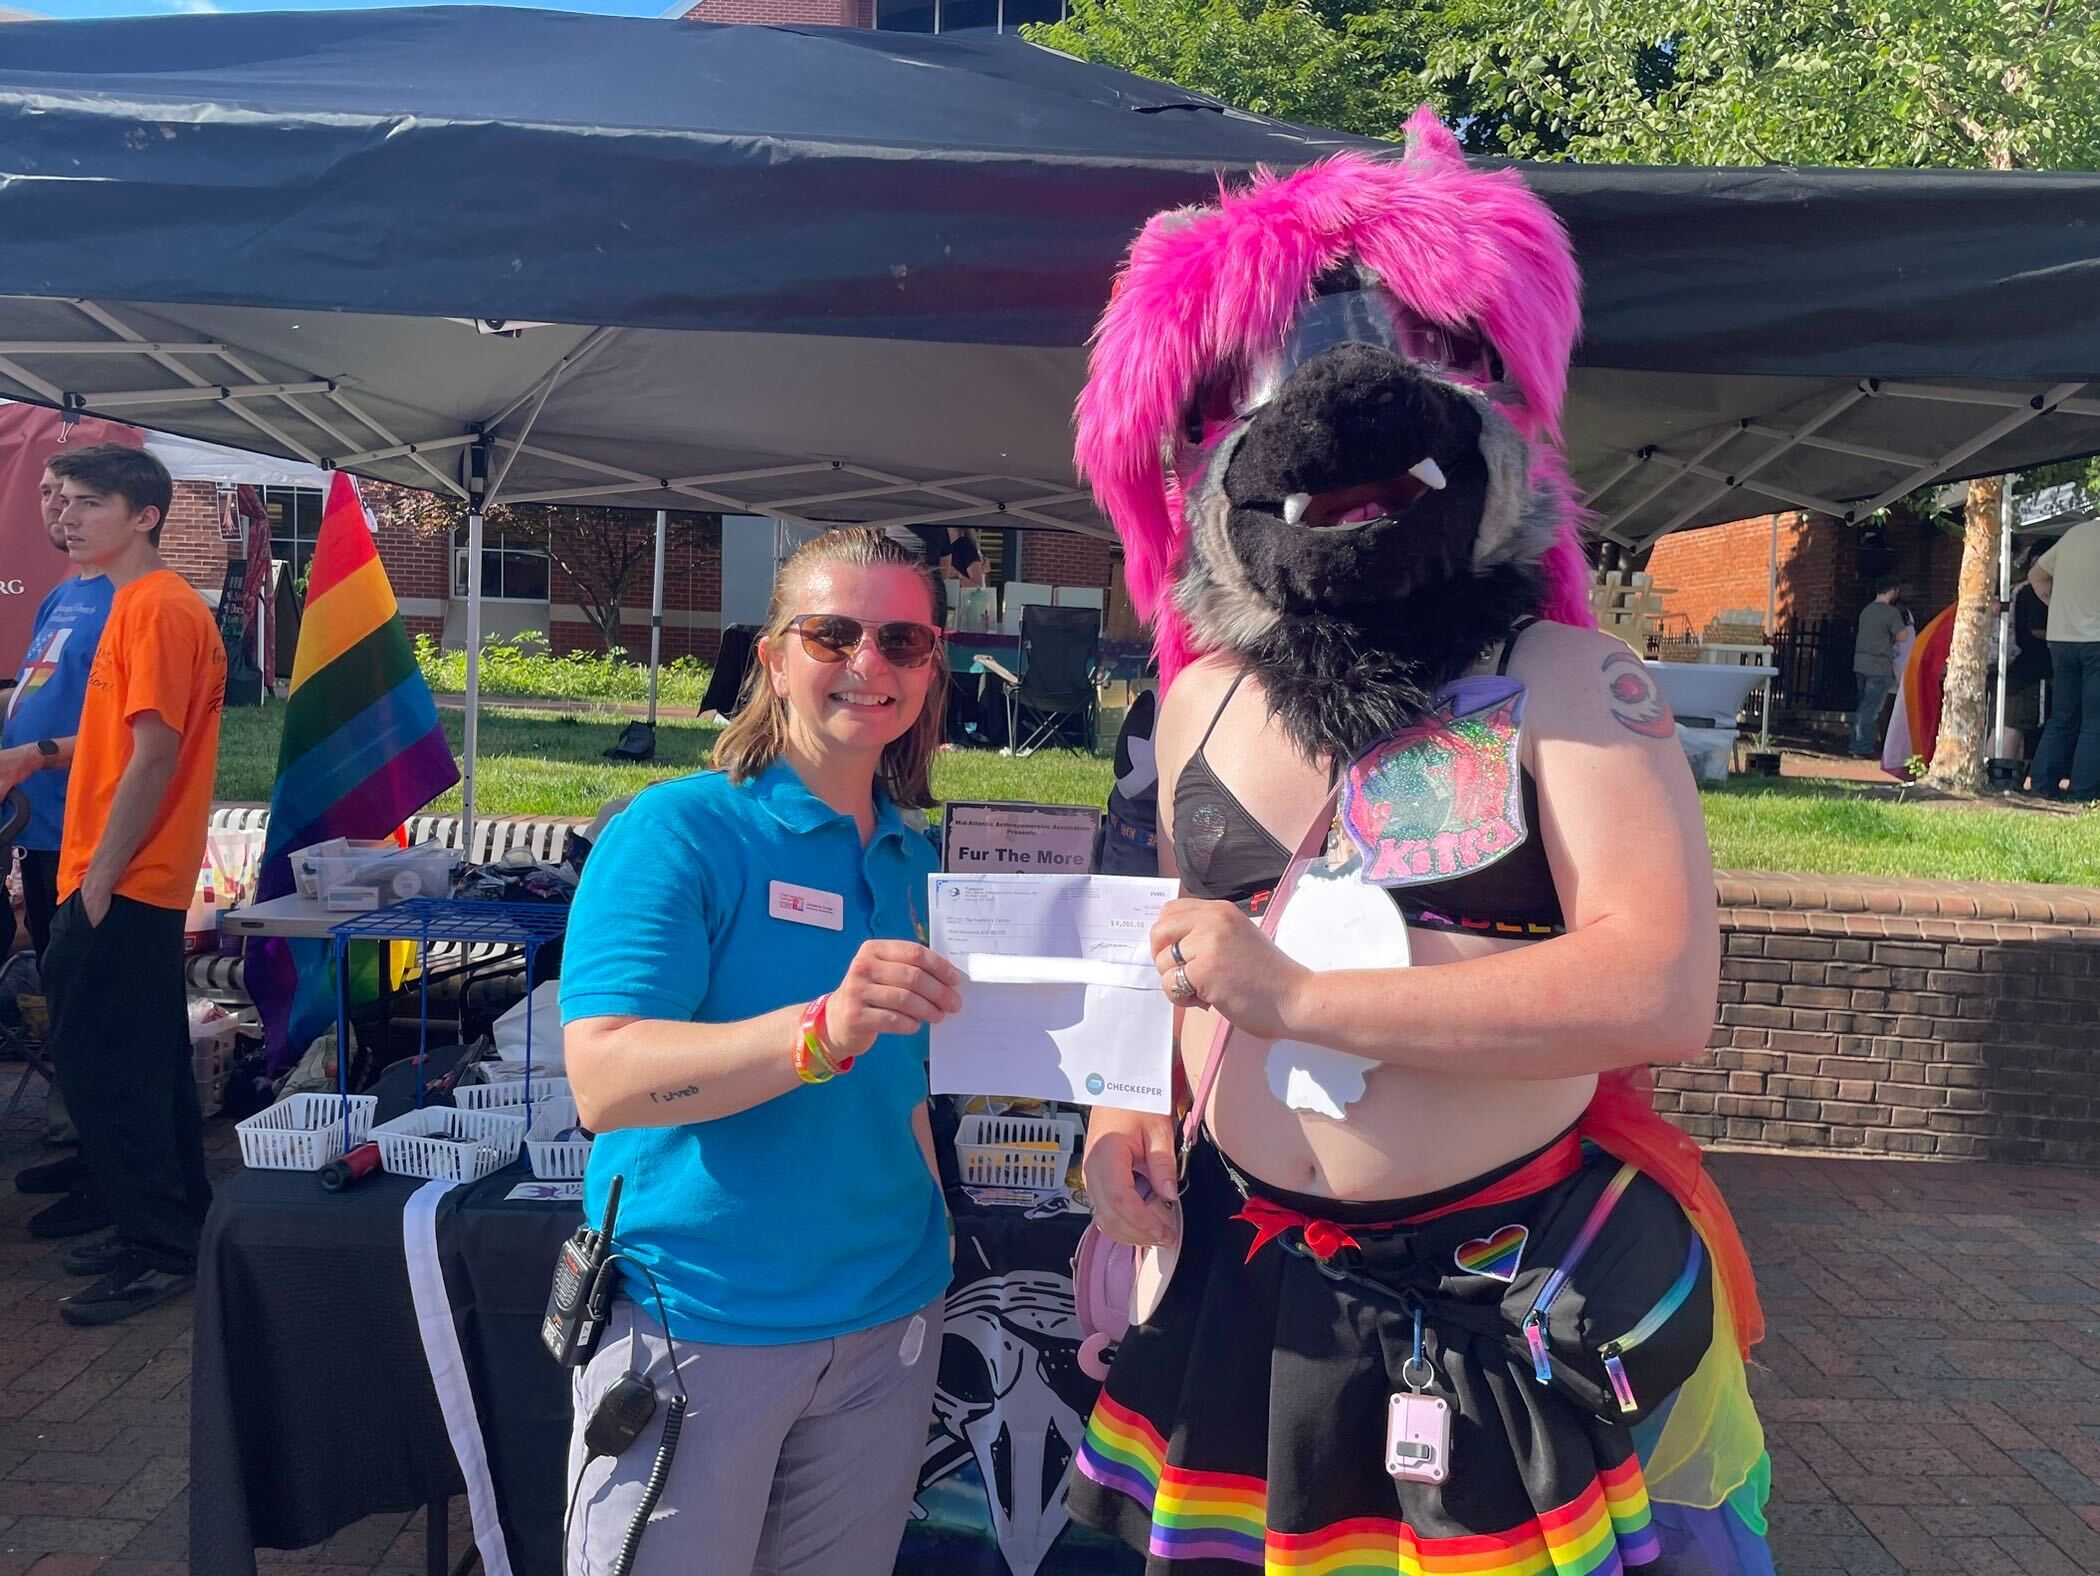 A person representing The Frederick Center holds up a check. They are wearing sunglasses and shorts and a blue shirt. There is a radio hanging from their belt. The other end of the check is held by our con chair Kitra. She is wearing a fursuit head with dark fur and bright purple hair. She is wearing a sport top and a skirt with rainbow colors on the hem.